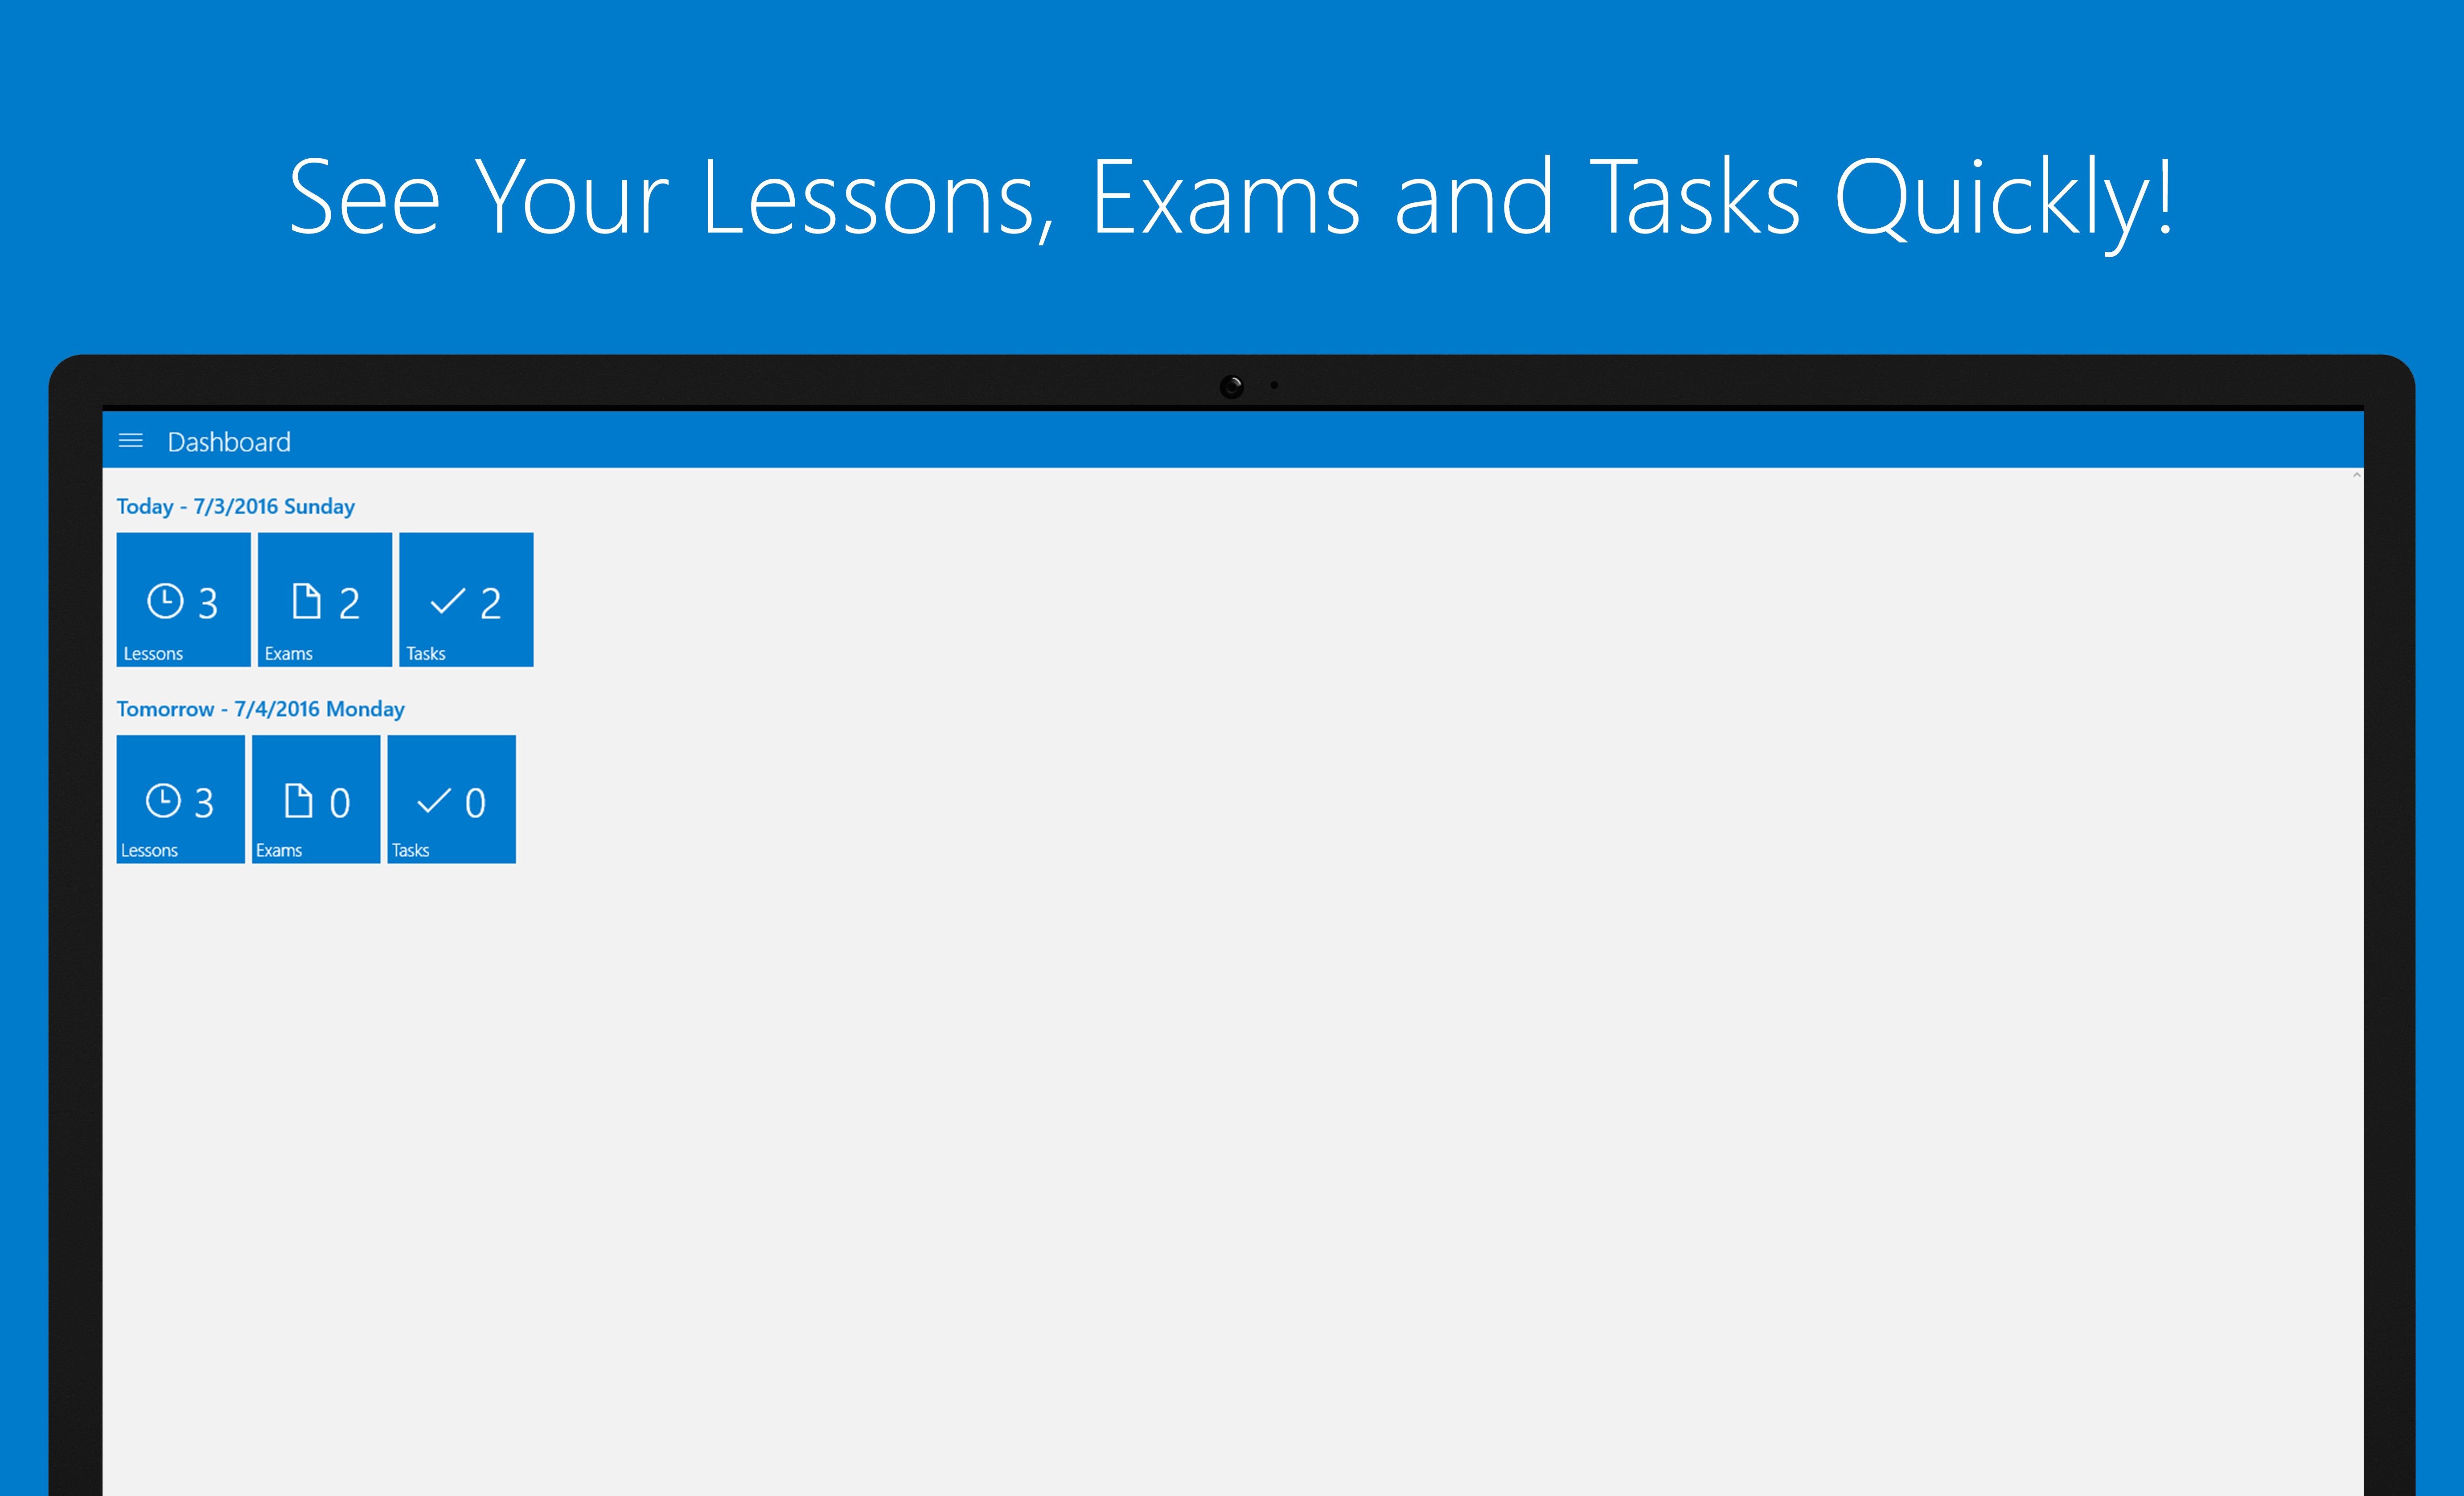 See Your Lessons, Exams and Tasks Quickly on Dasboard Page!